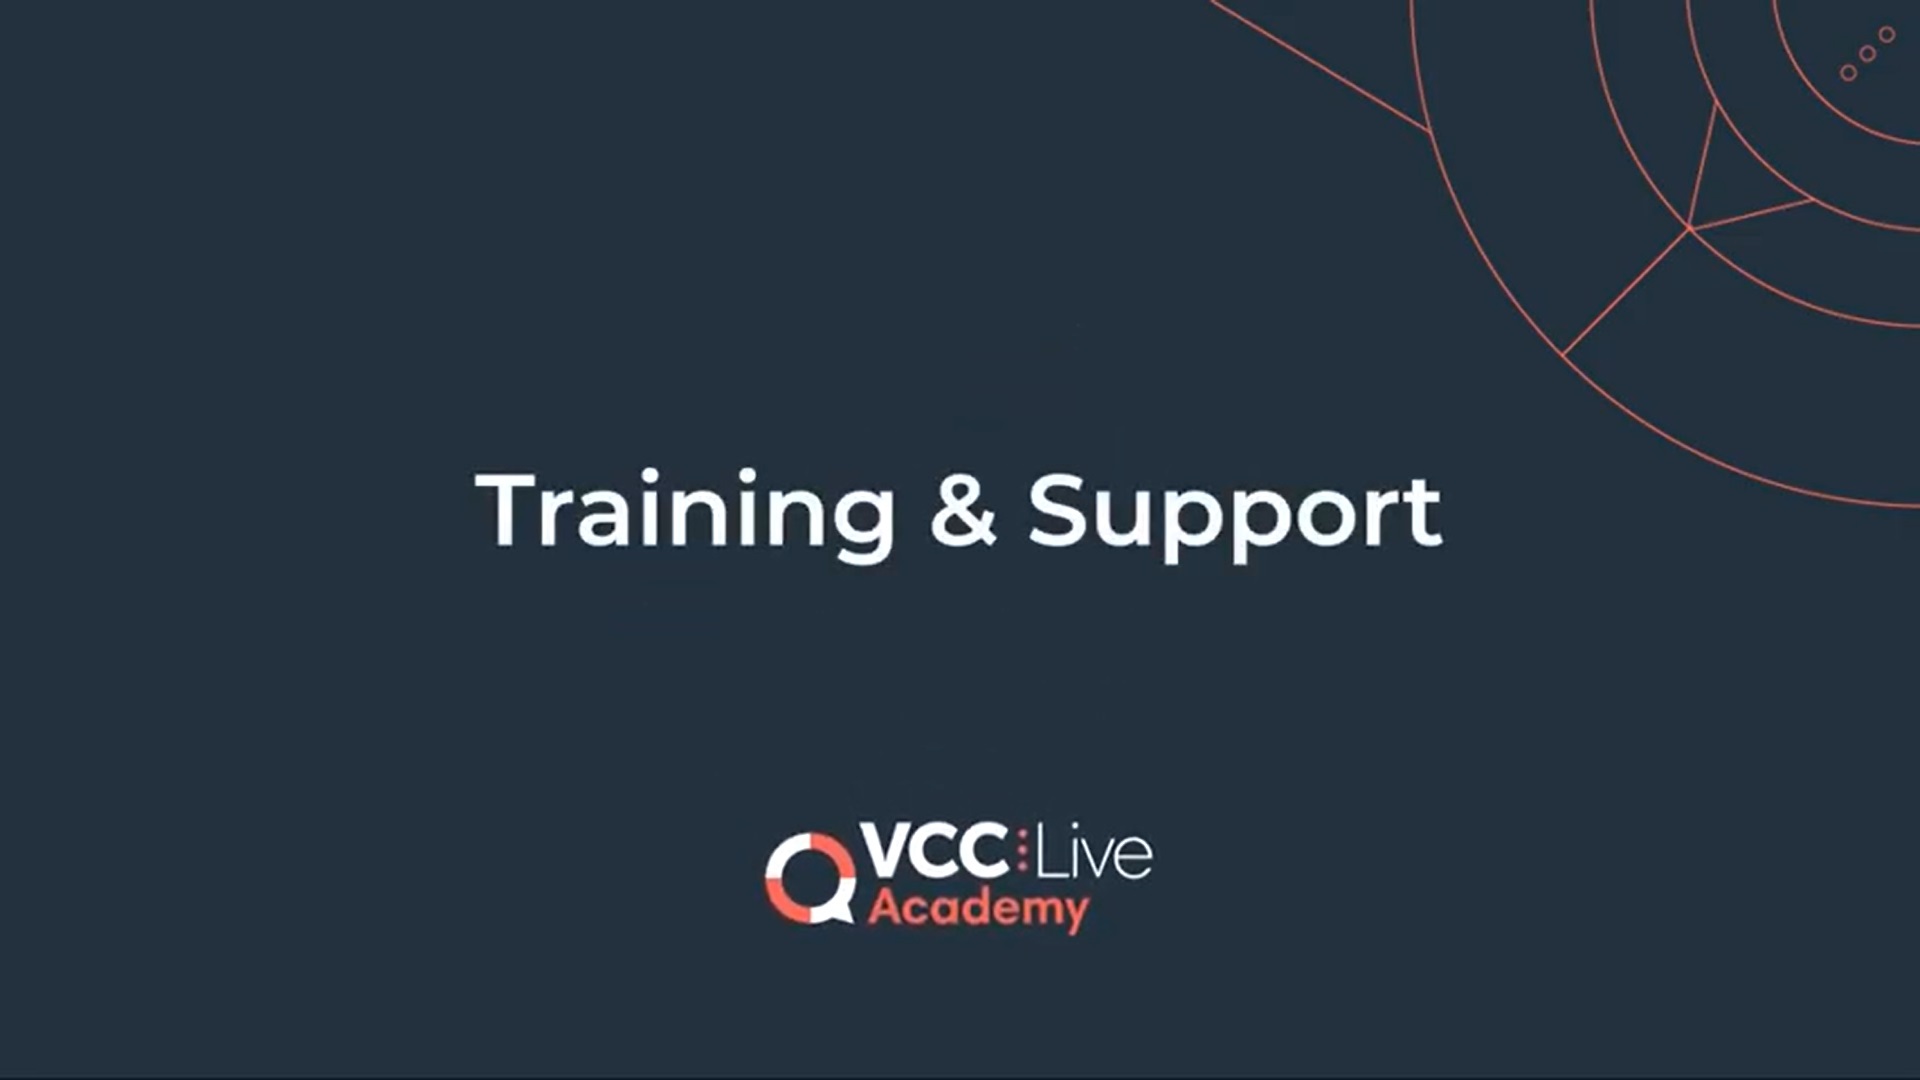 https://vcc.live/wp-content/uploads/2022/08/remote-agents-course-training-support.jpg